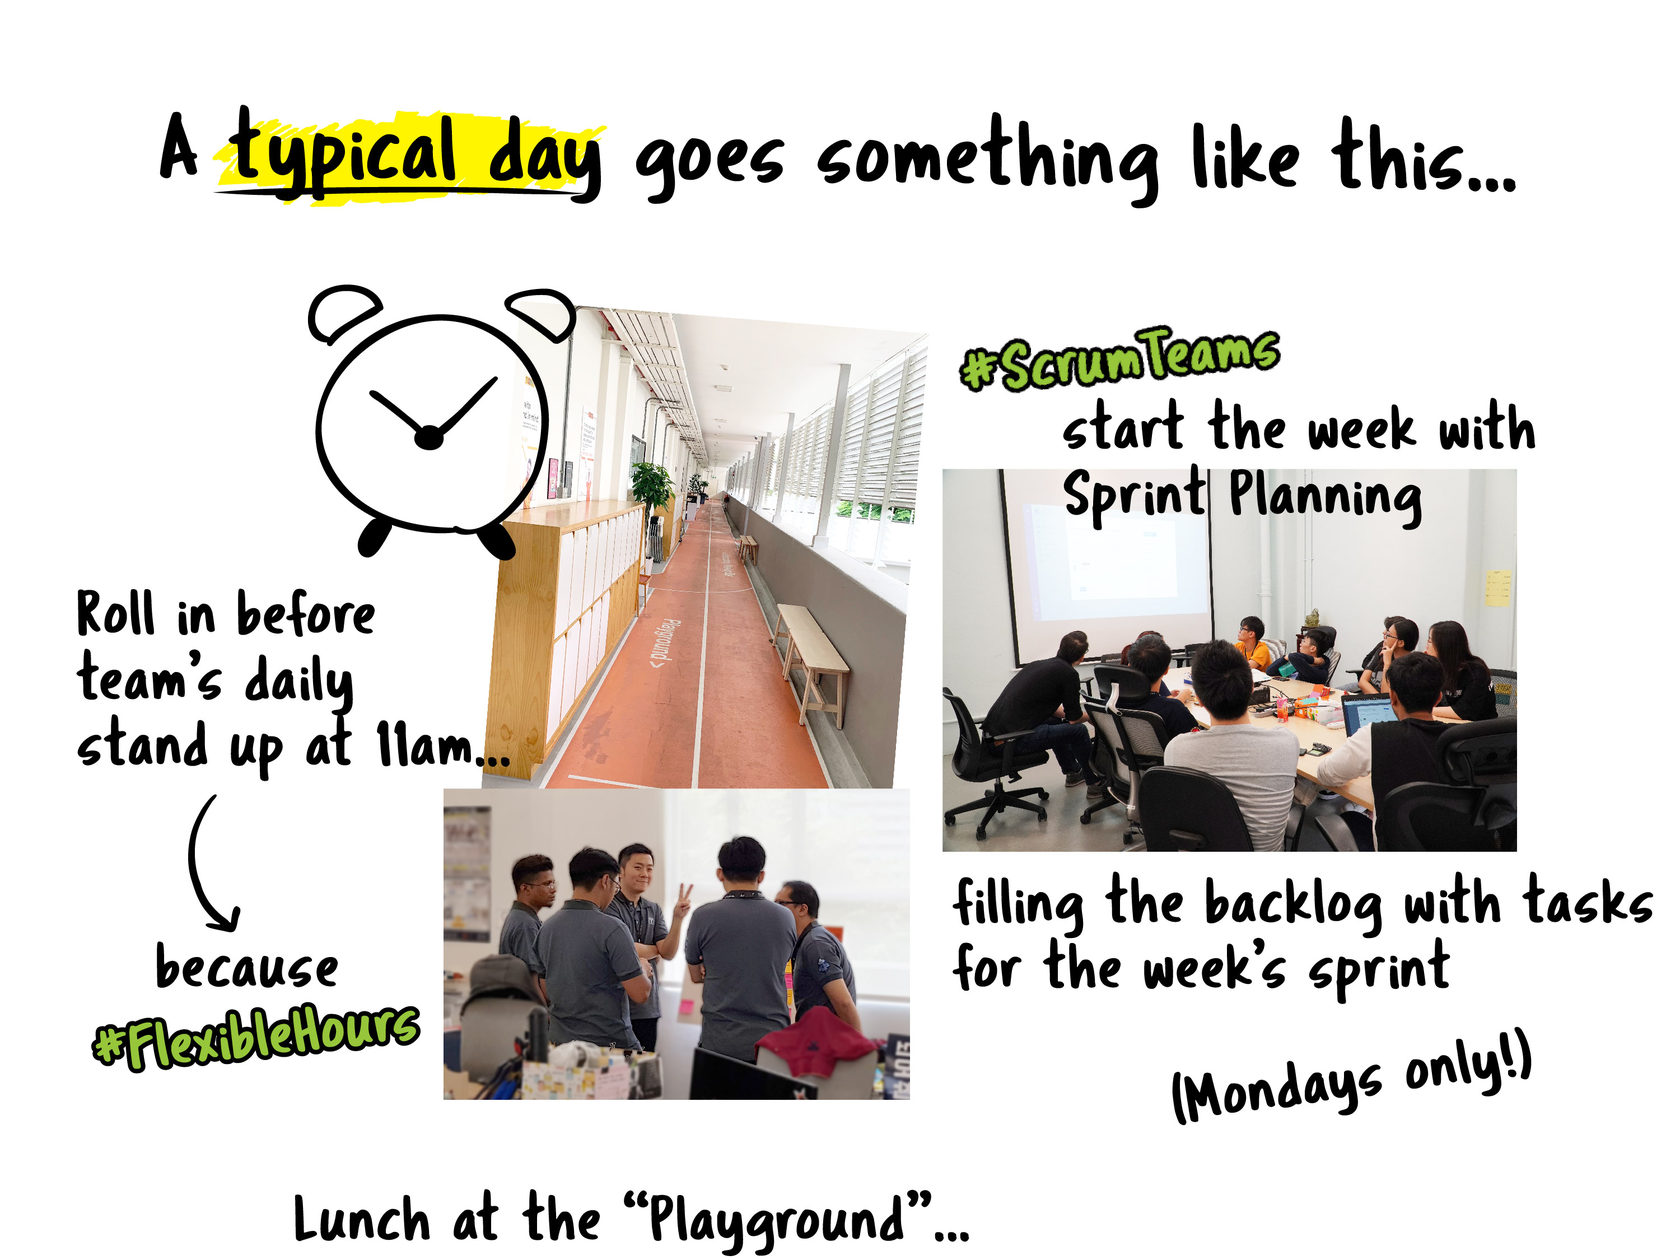 A typical day starts at 11am for my team’s daily stand up (because flexible hours!) And working in a #ScrumTeam, we start the week on Mondays with Sprint Planning to fill our backlog with tasks for the week’s sprint.